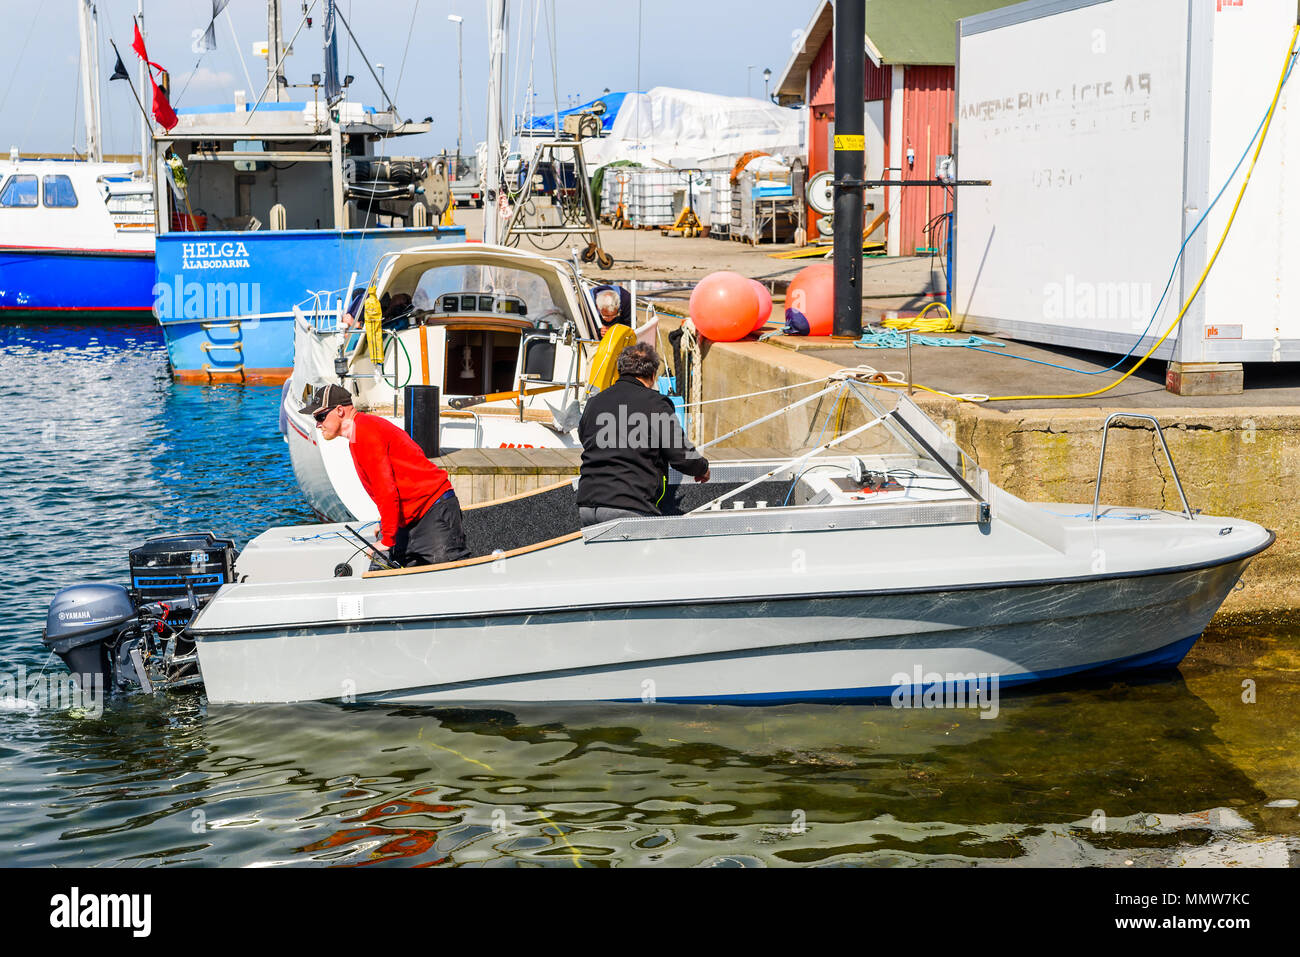 Alabodarna, Sweden - April 29, 2018: Documentary of everyday life and place. Two persons in a gray motorboat, leaving for a trip at sea. Stock Photo